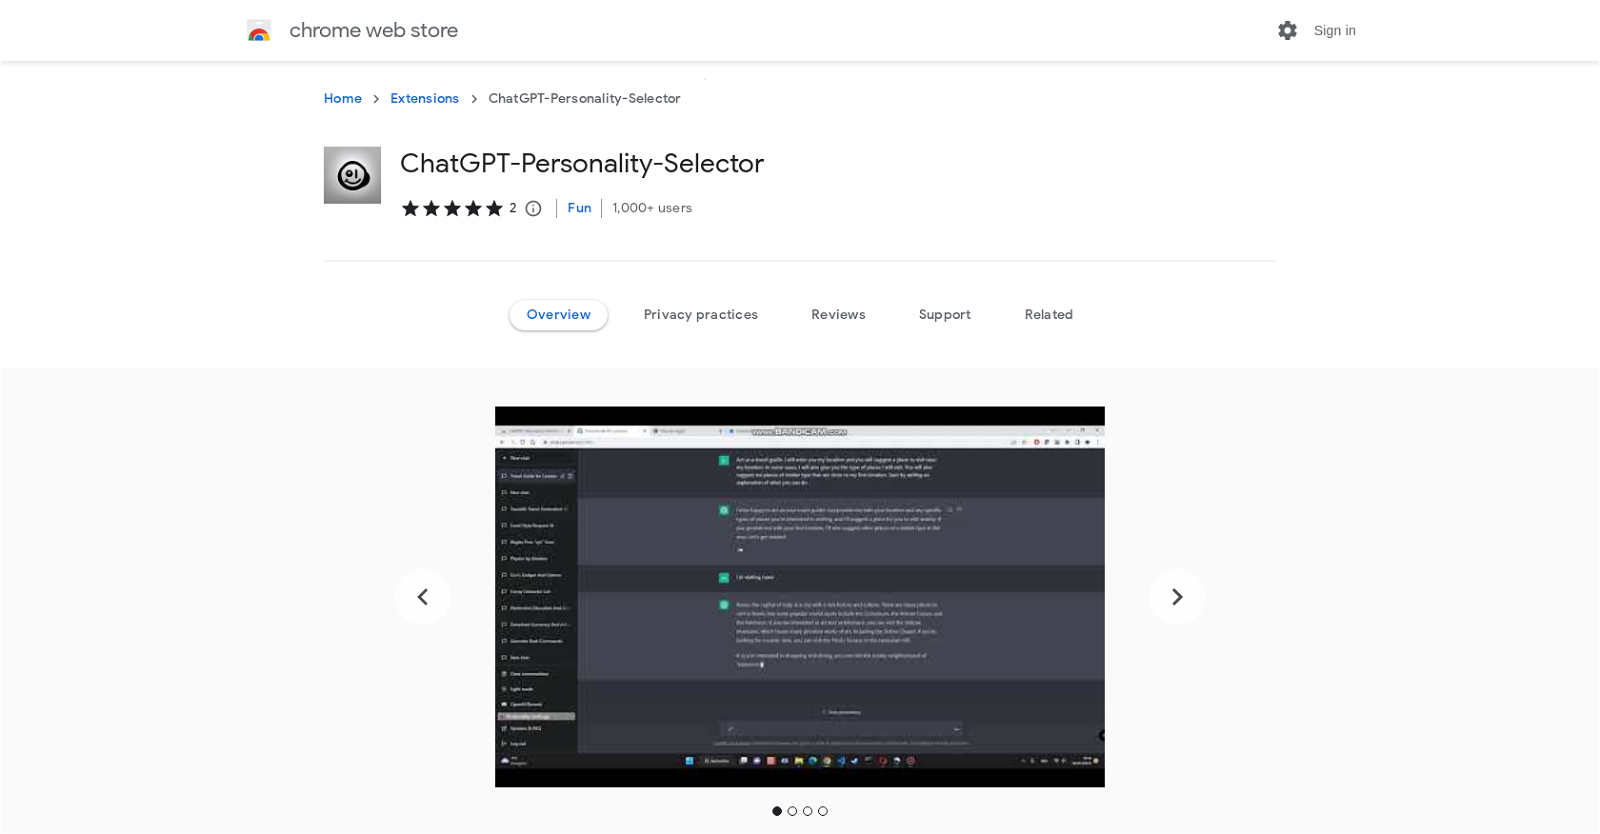 ChatGPT-Personality-Selector website